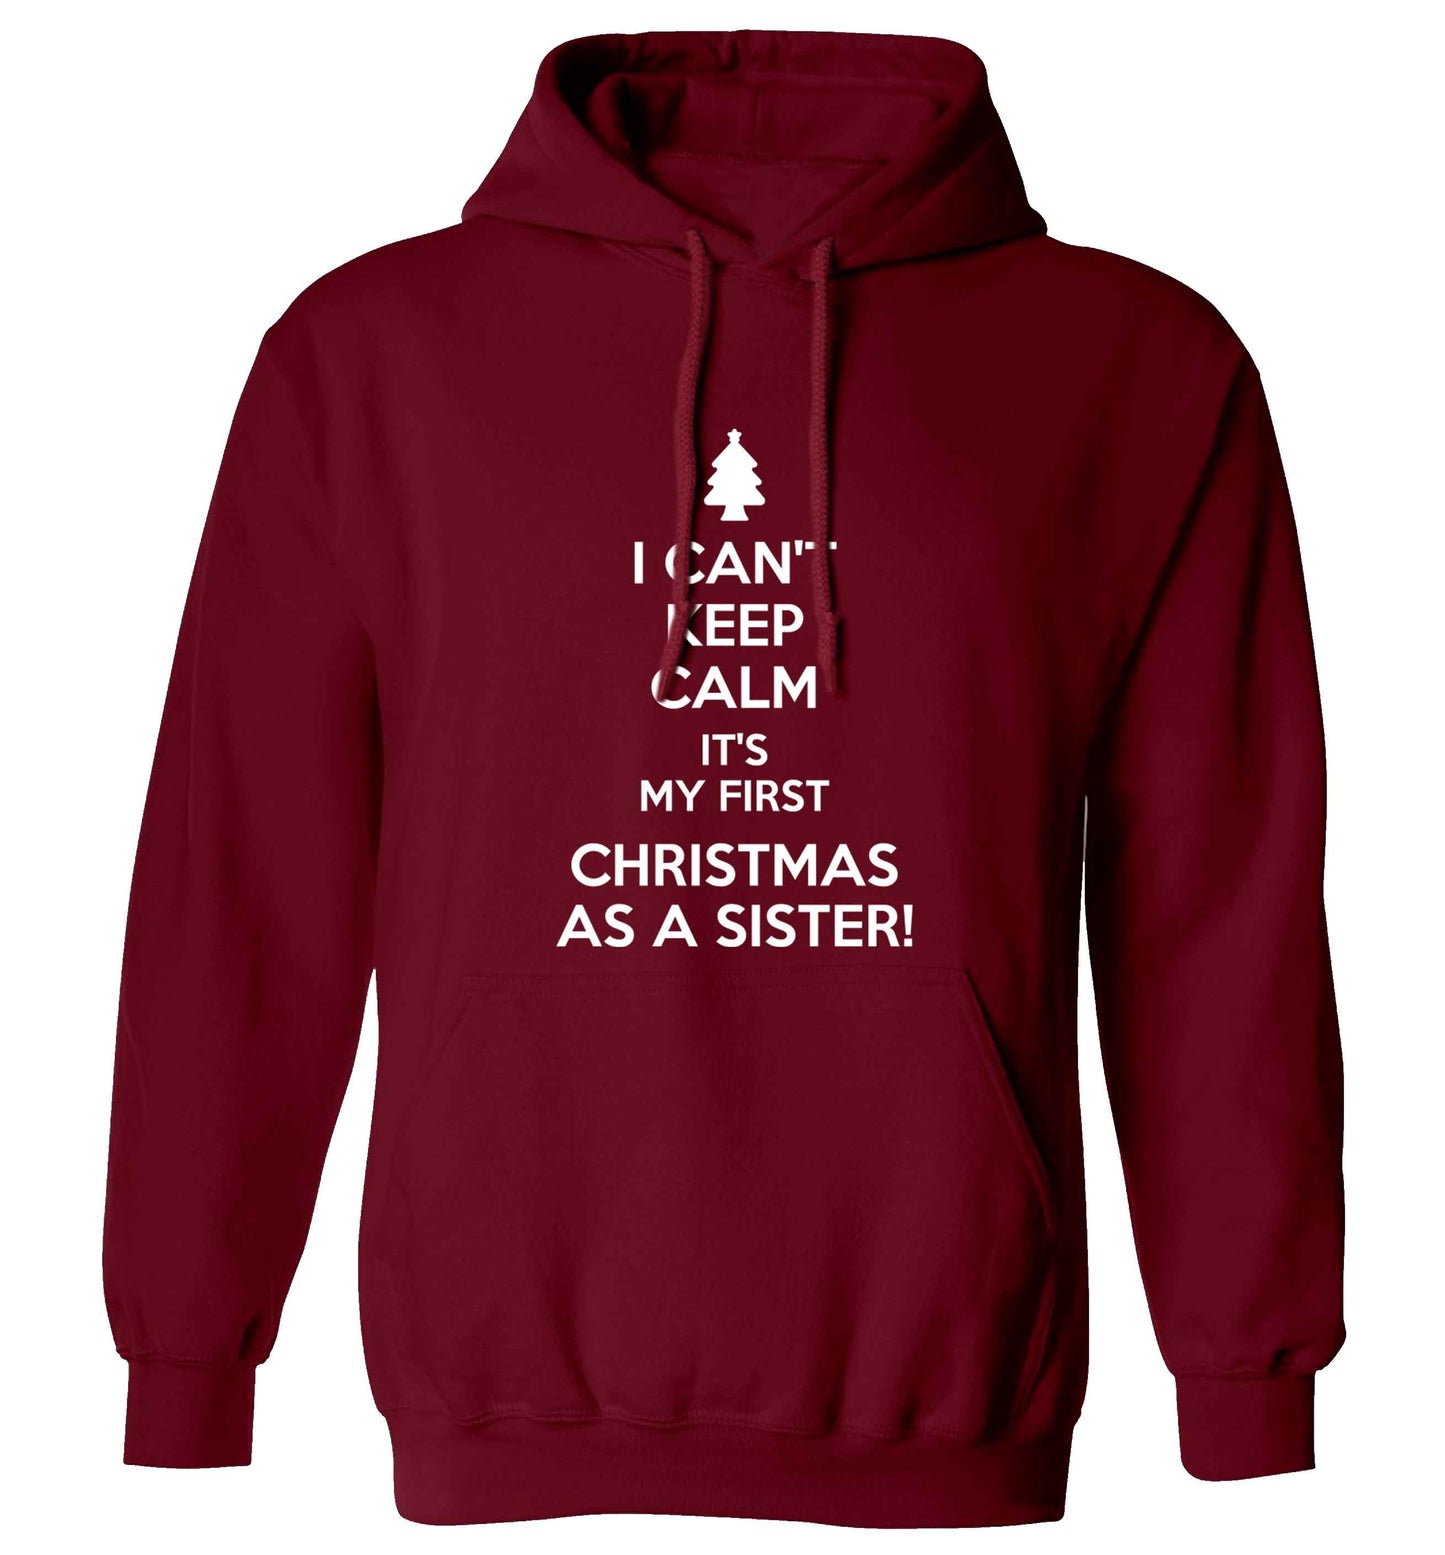 I can't keep calm it's my first Christmas as a sister! adults unisex maroon hoodie 2XL